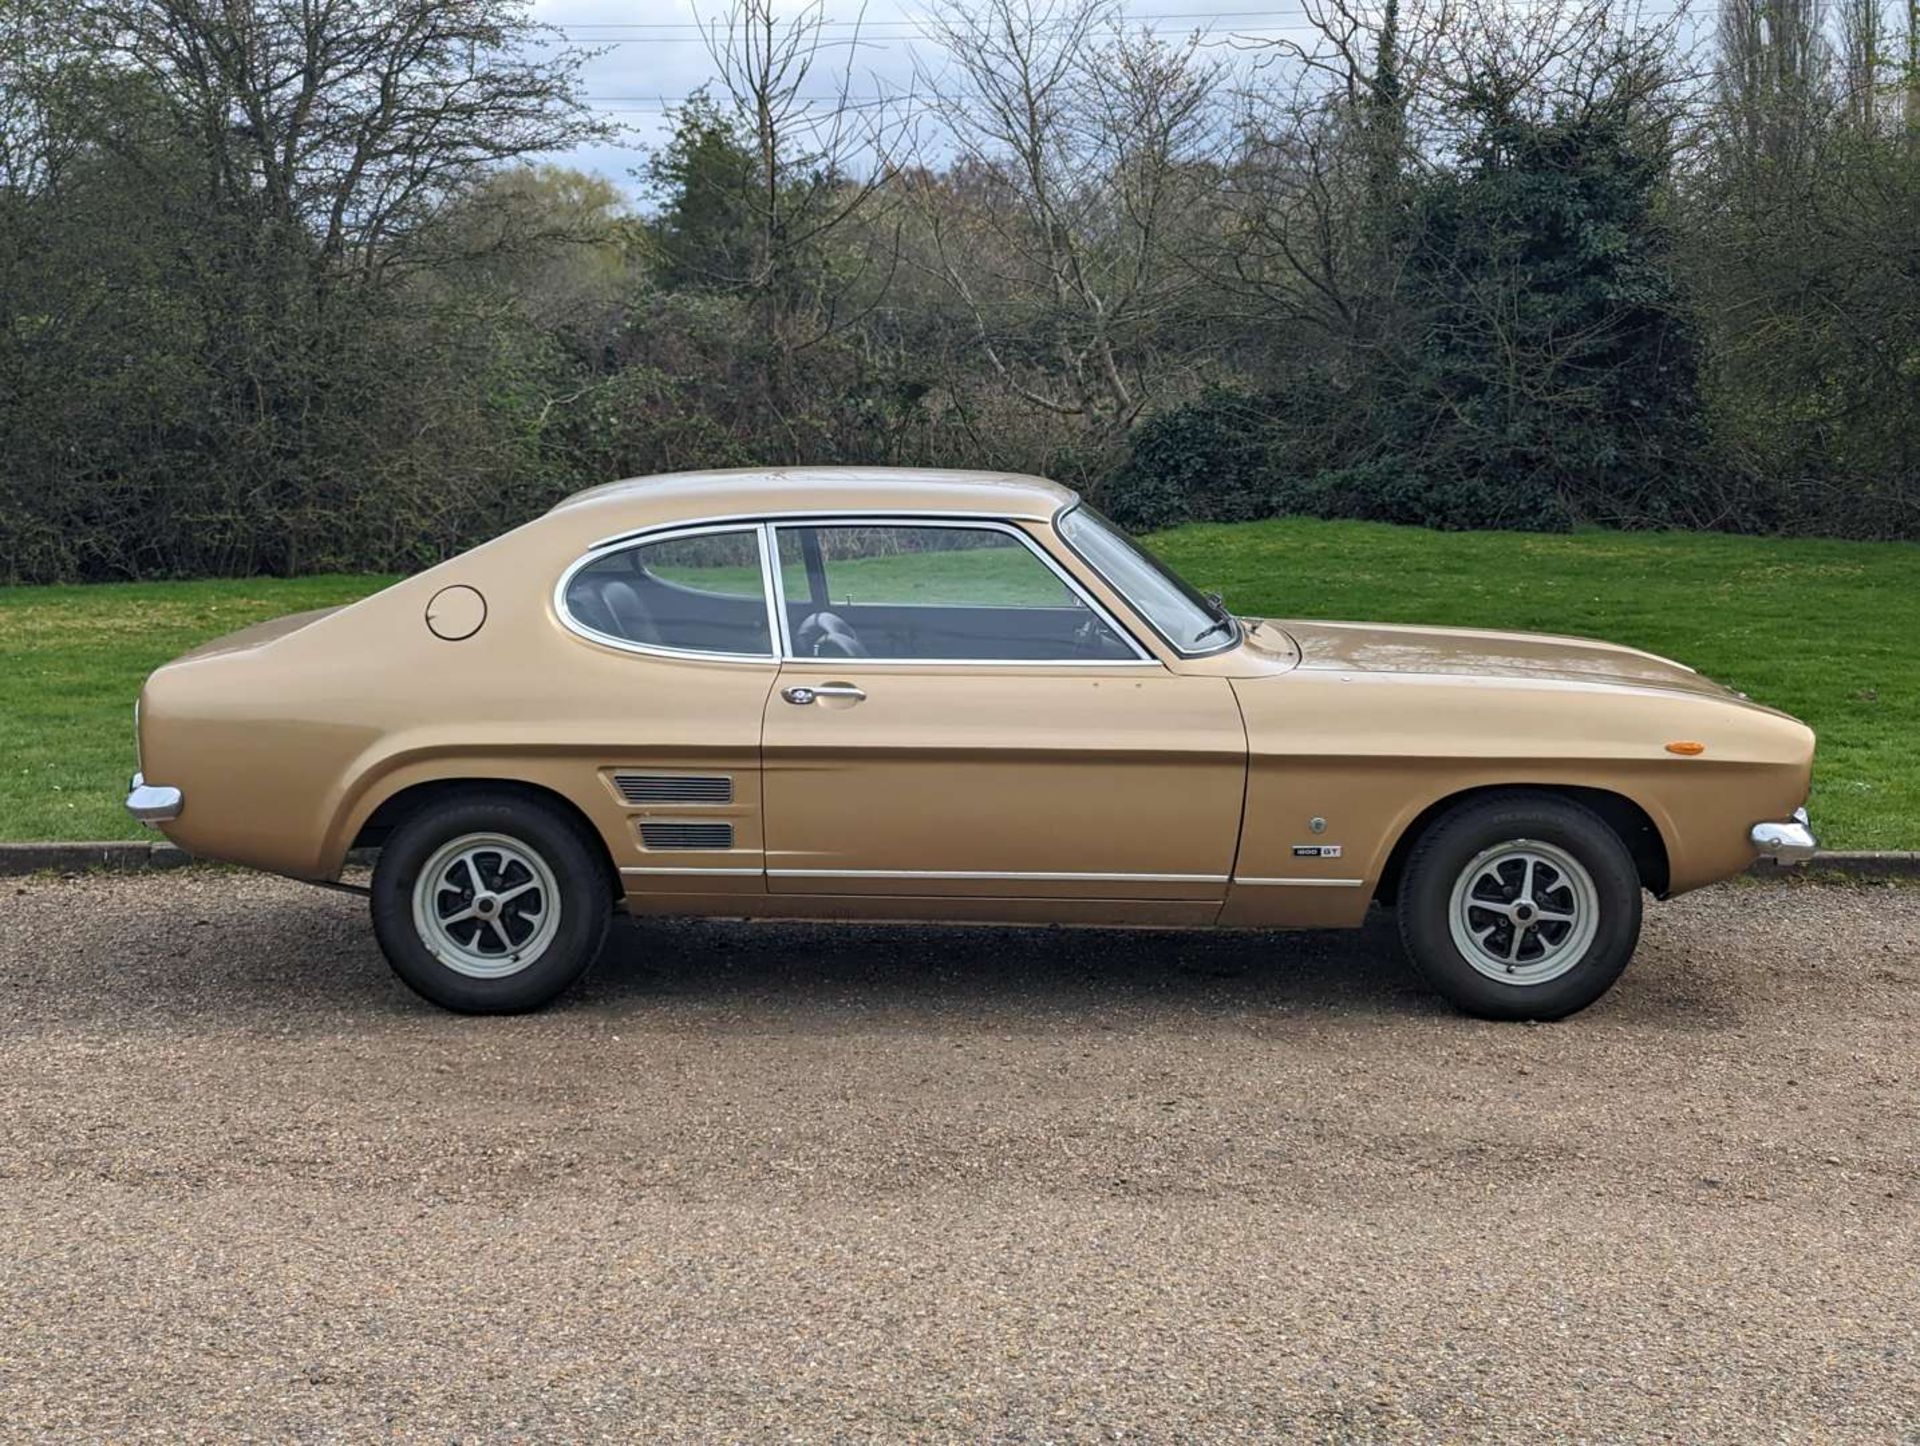 1969 FORD CAPRI 1600 GT LHD - Image 8 of 26